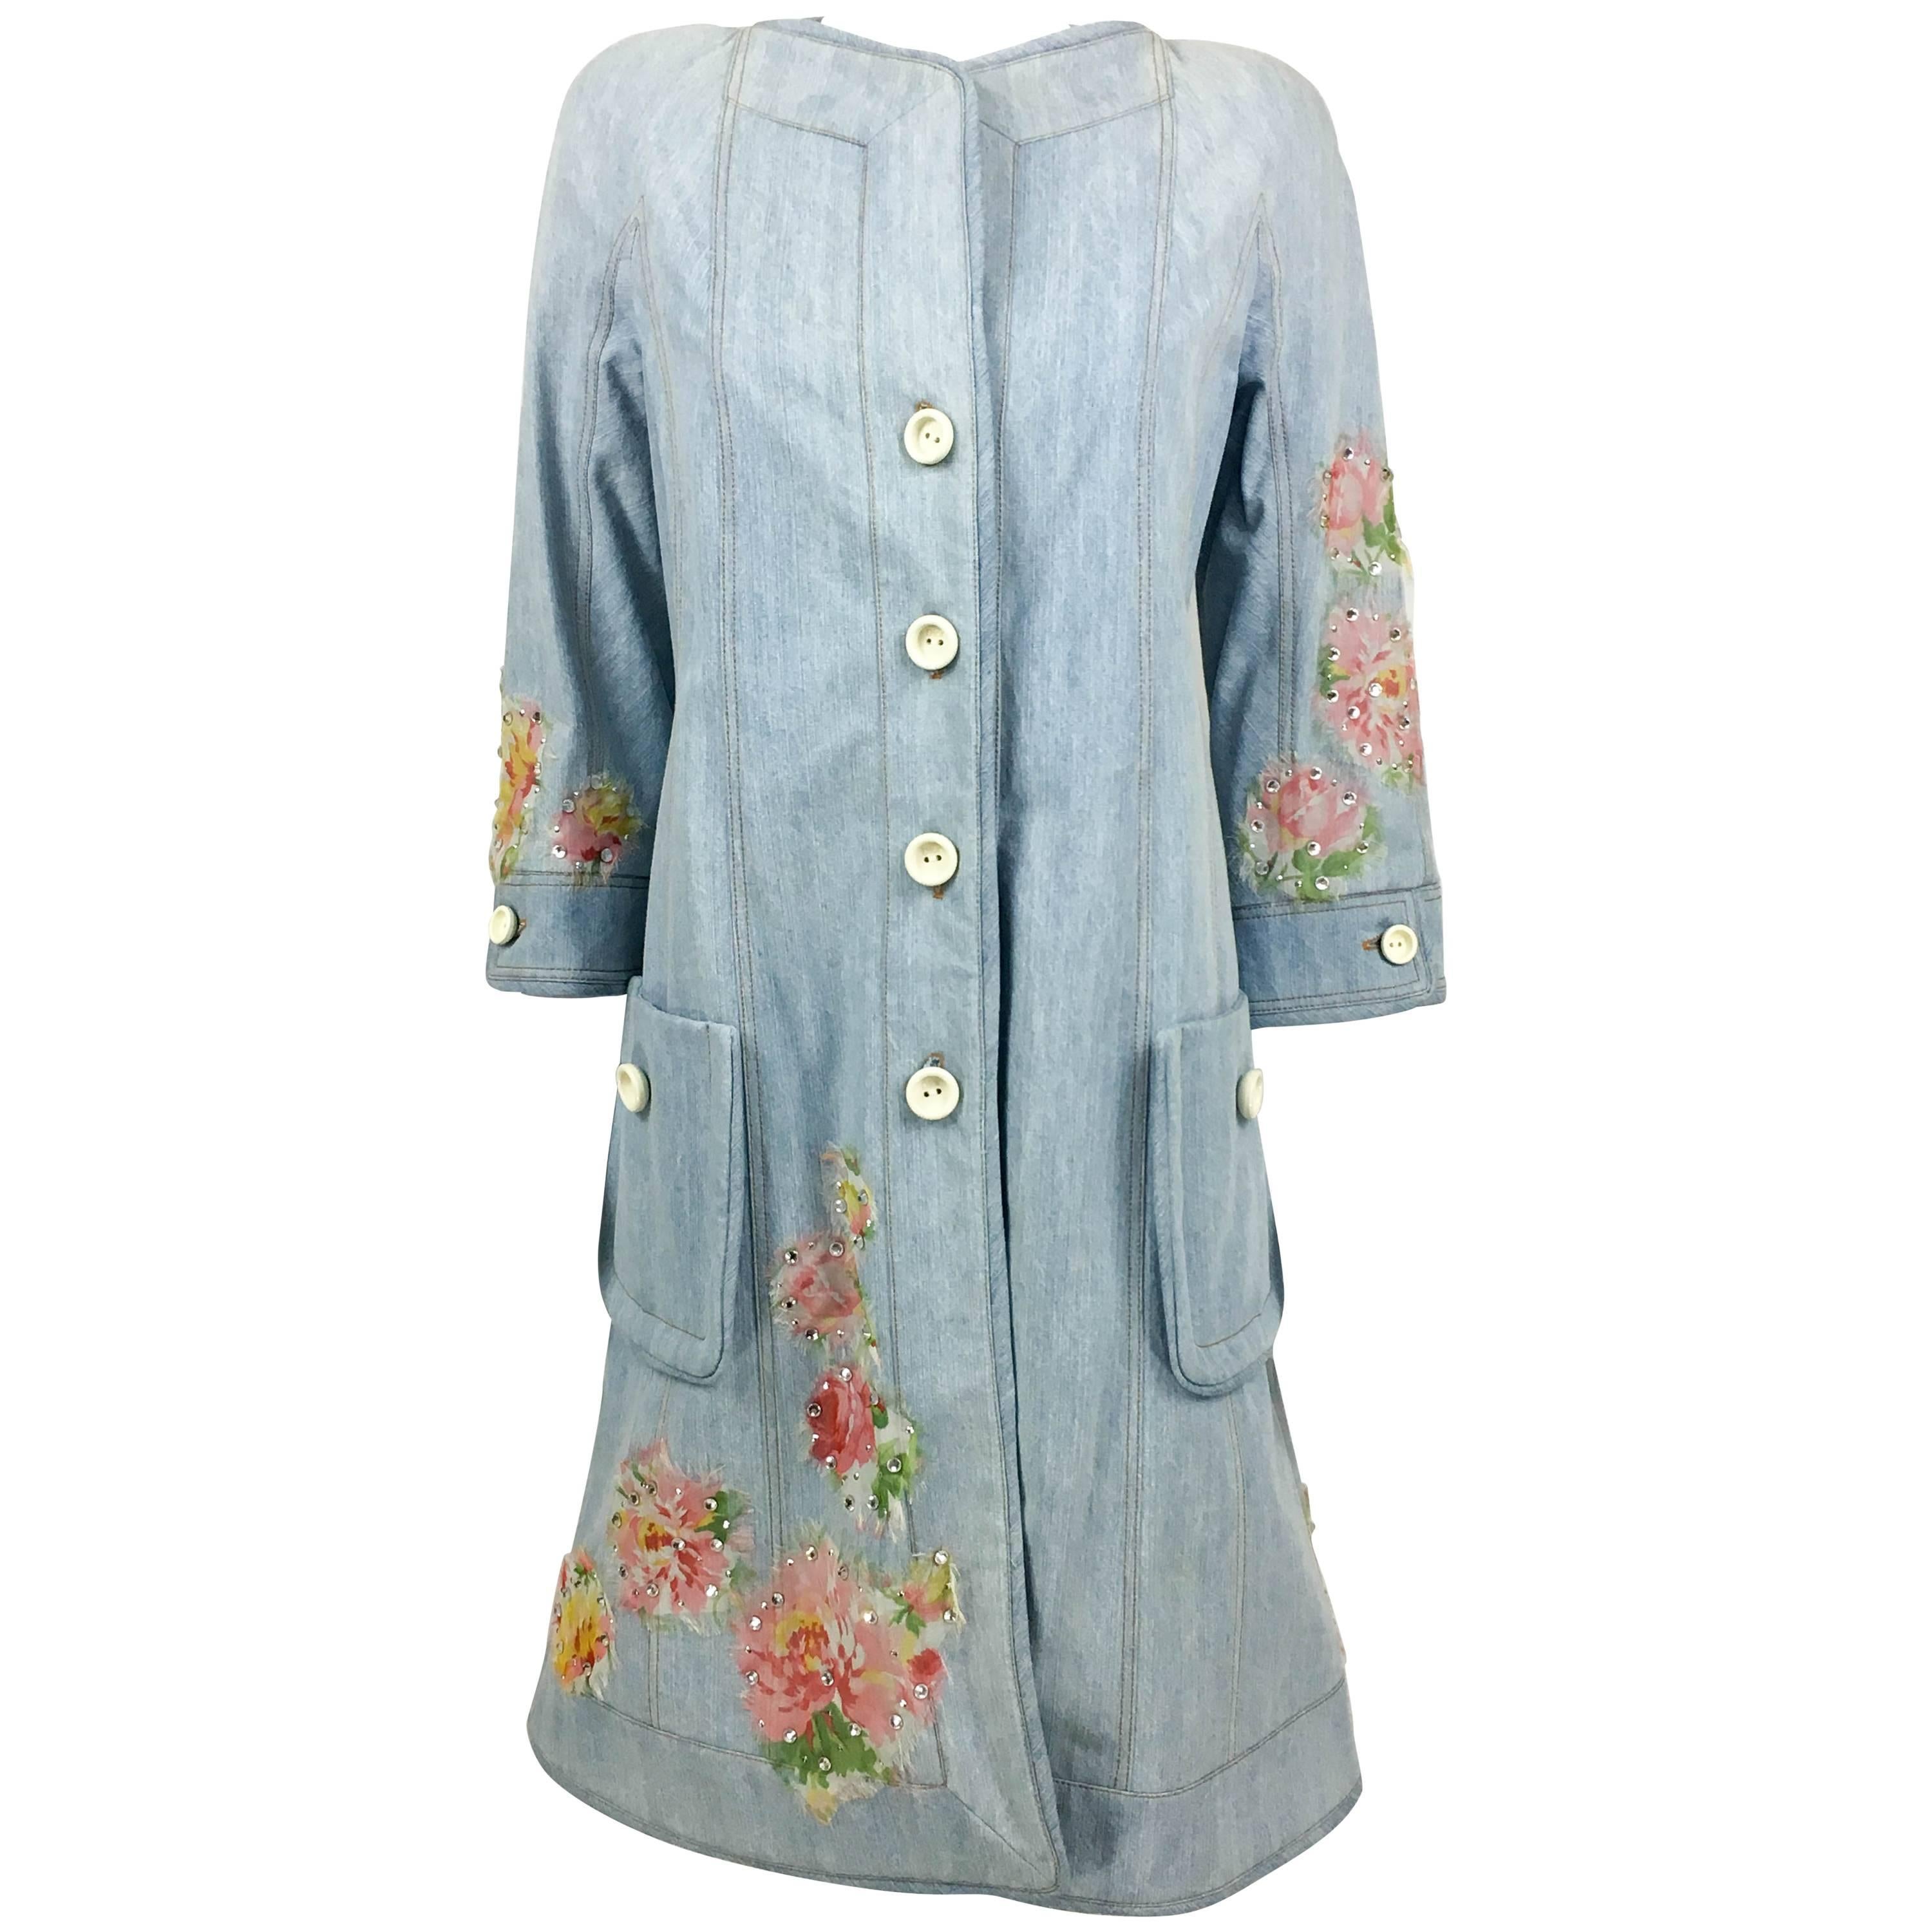 Dior by Galliano 2005 Runway Look Denim Shirt Dress With Crystals and Appliqués For Sale